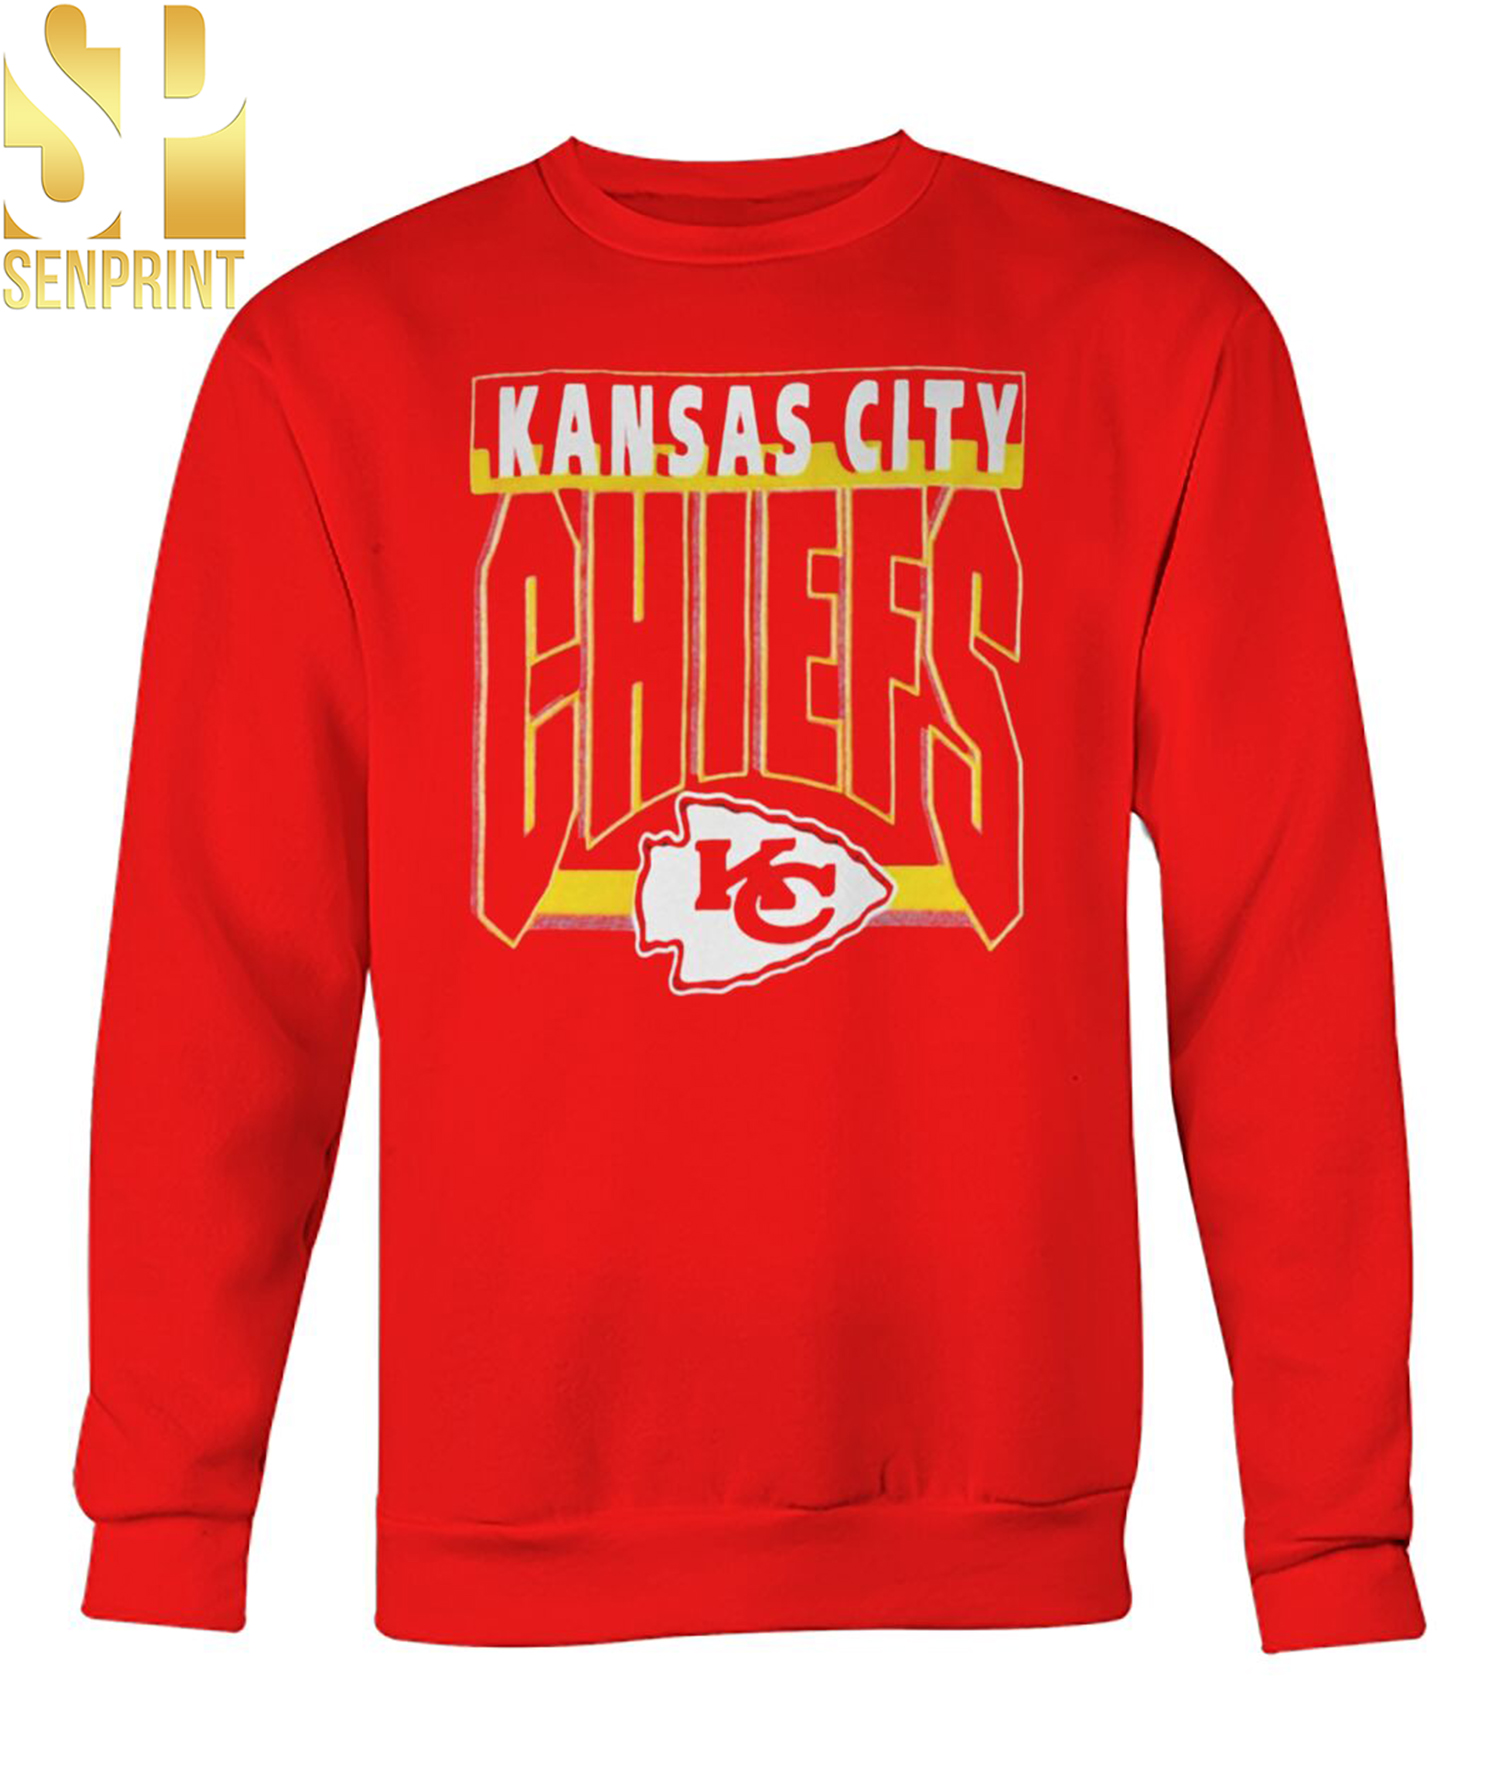 Taylor Swift's Kansas City Chiefs vs Los Angeles Chargers Game Day Outfit Sweatshirt